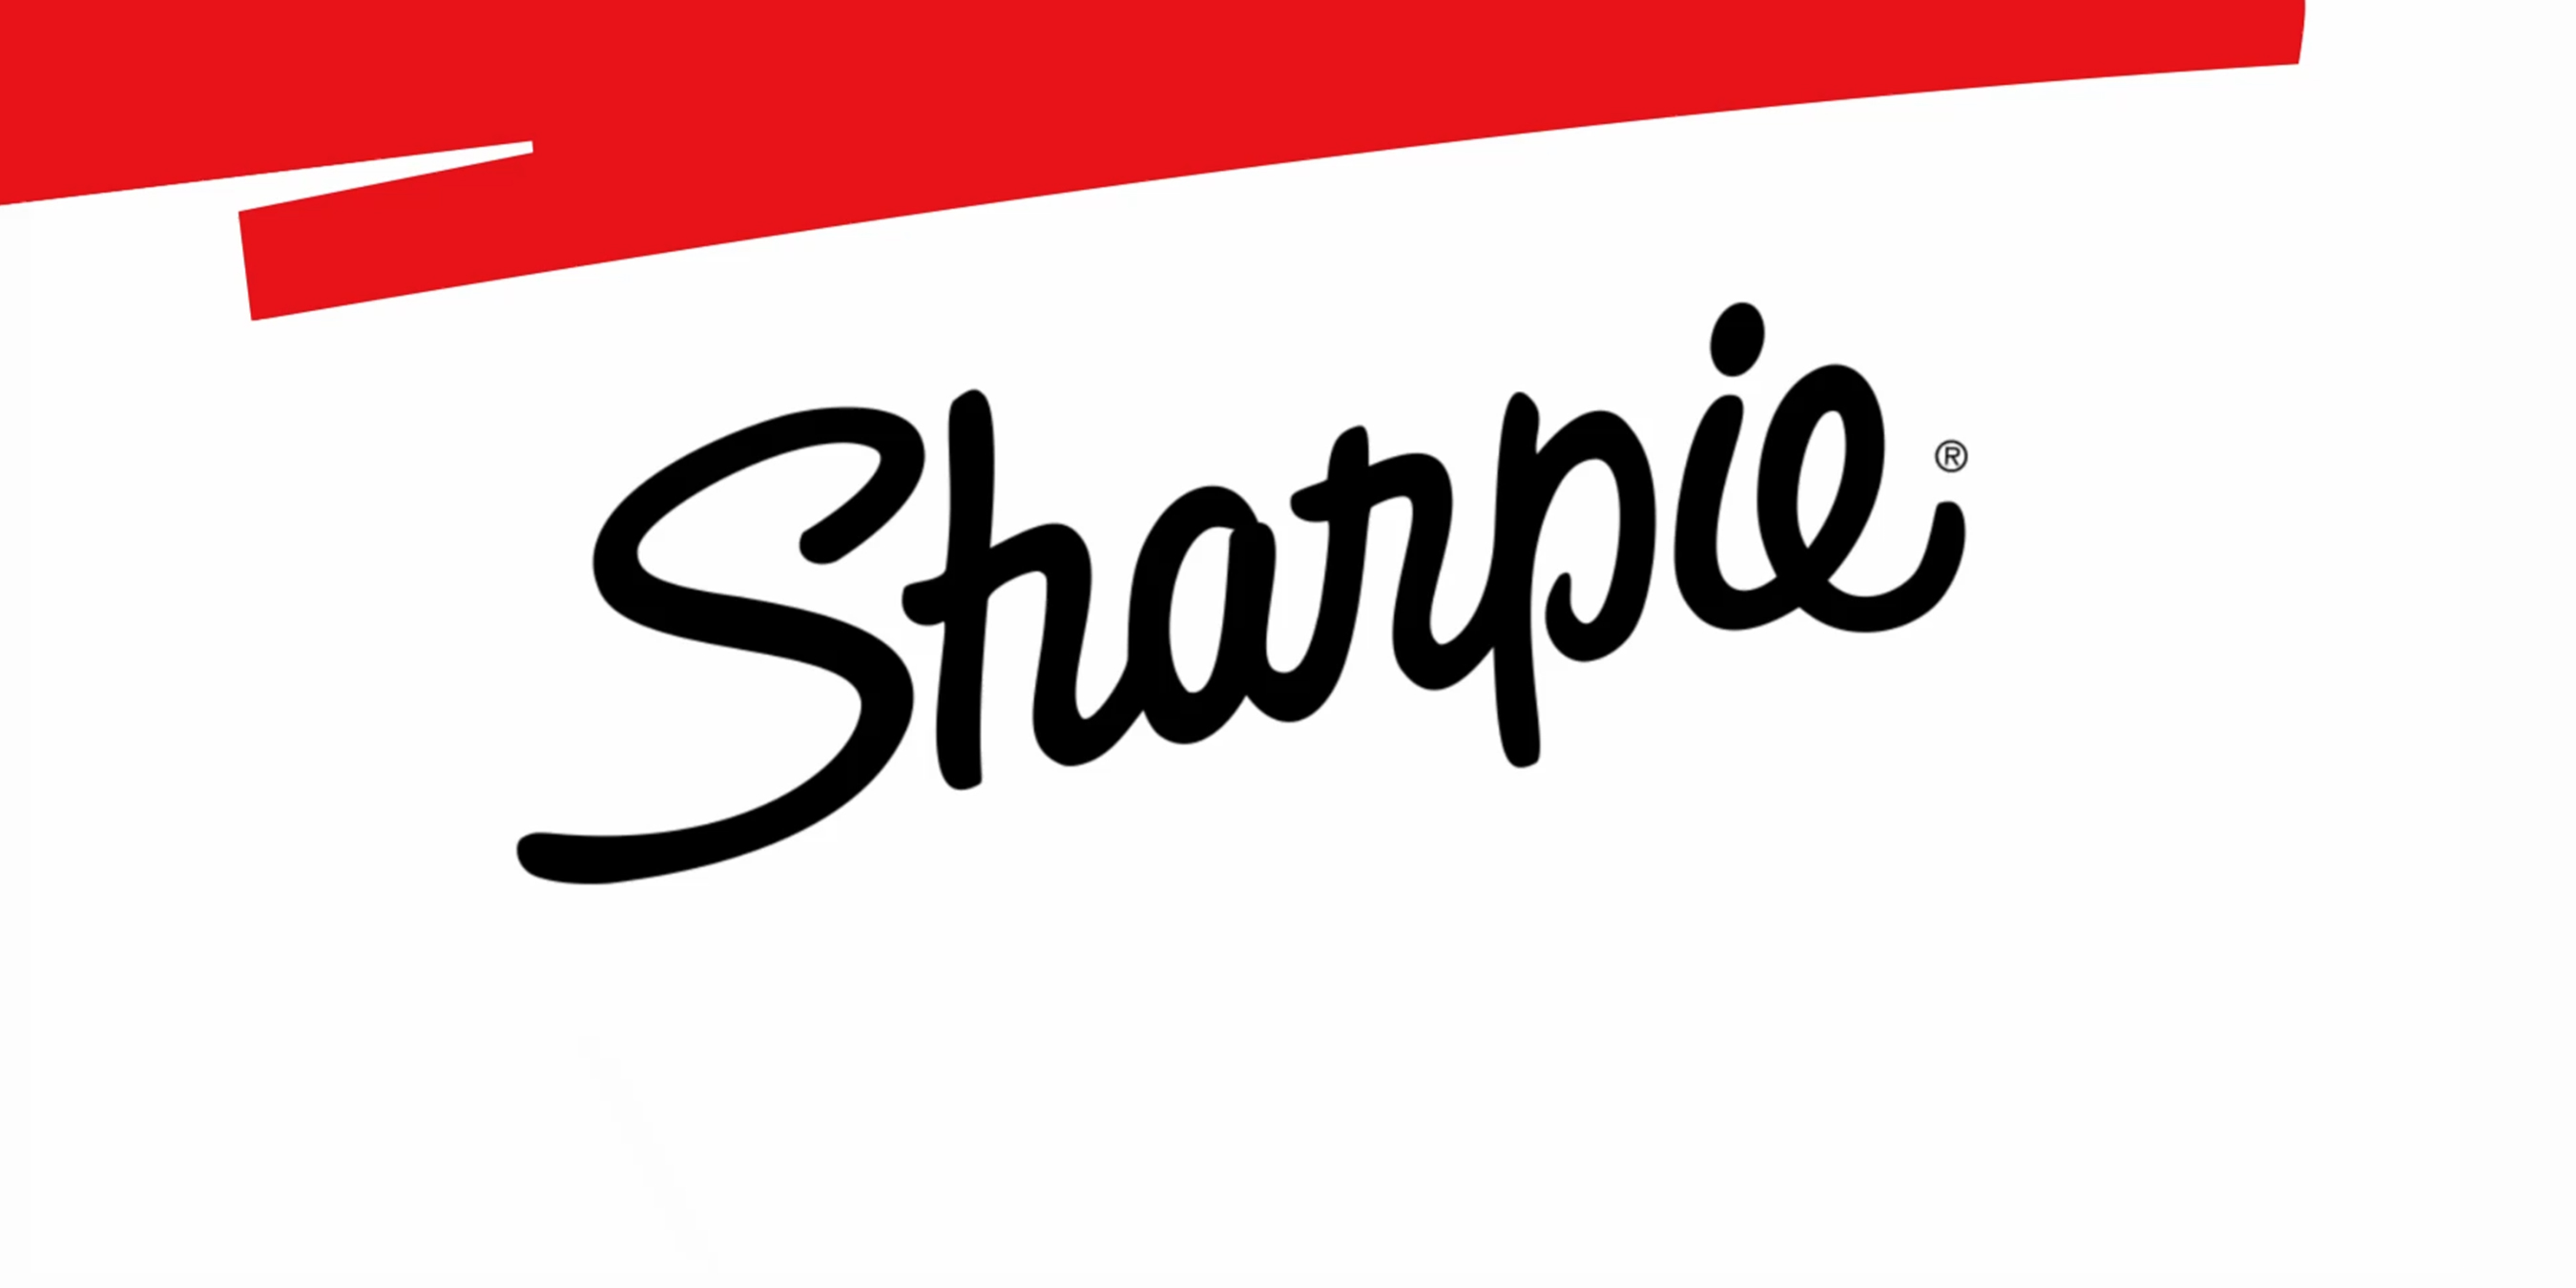 Sharpie® Partners with Street Artist Kelsey Montague to Inspire Consumers to Make the World Their Canvas Through the Brand's Latest Campaign